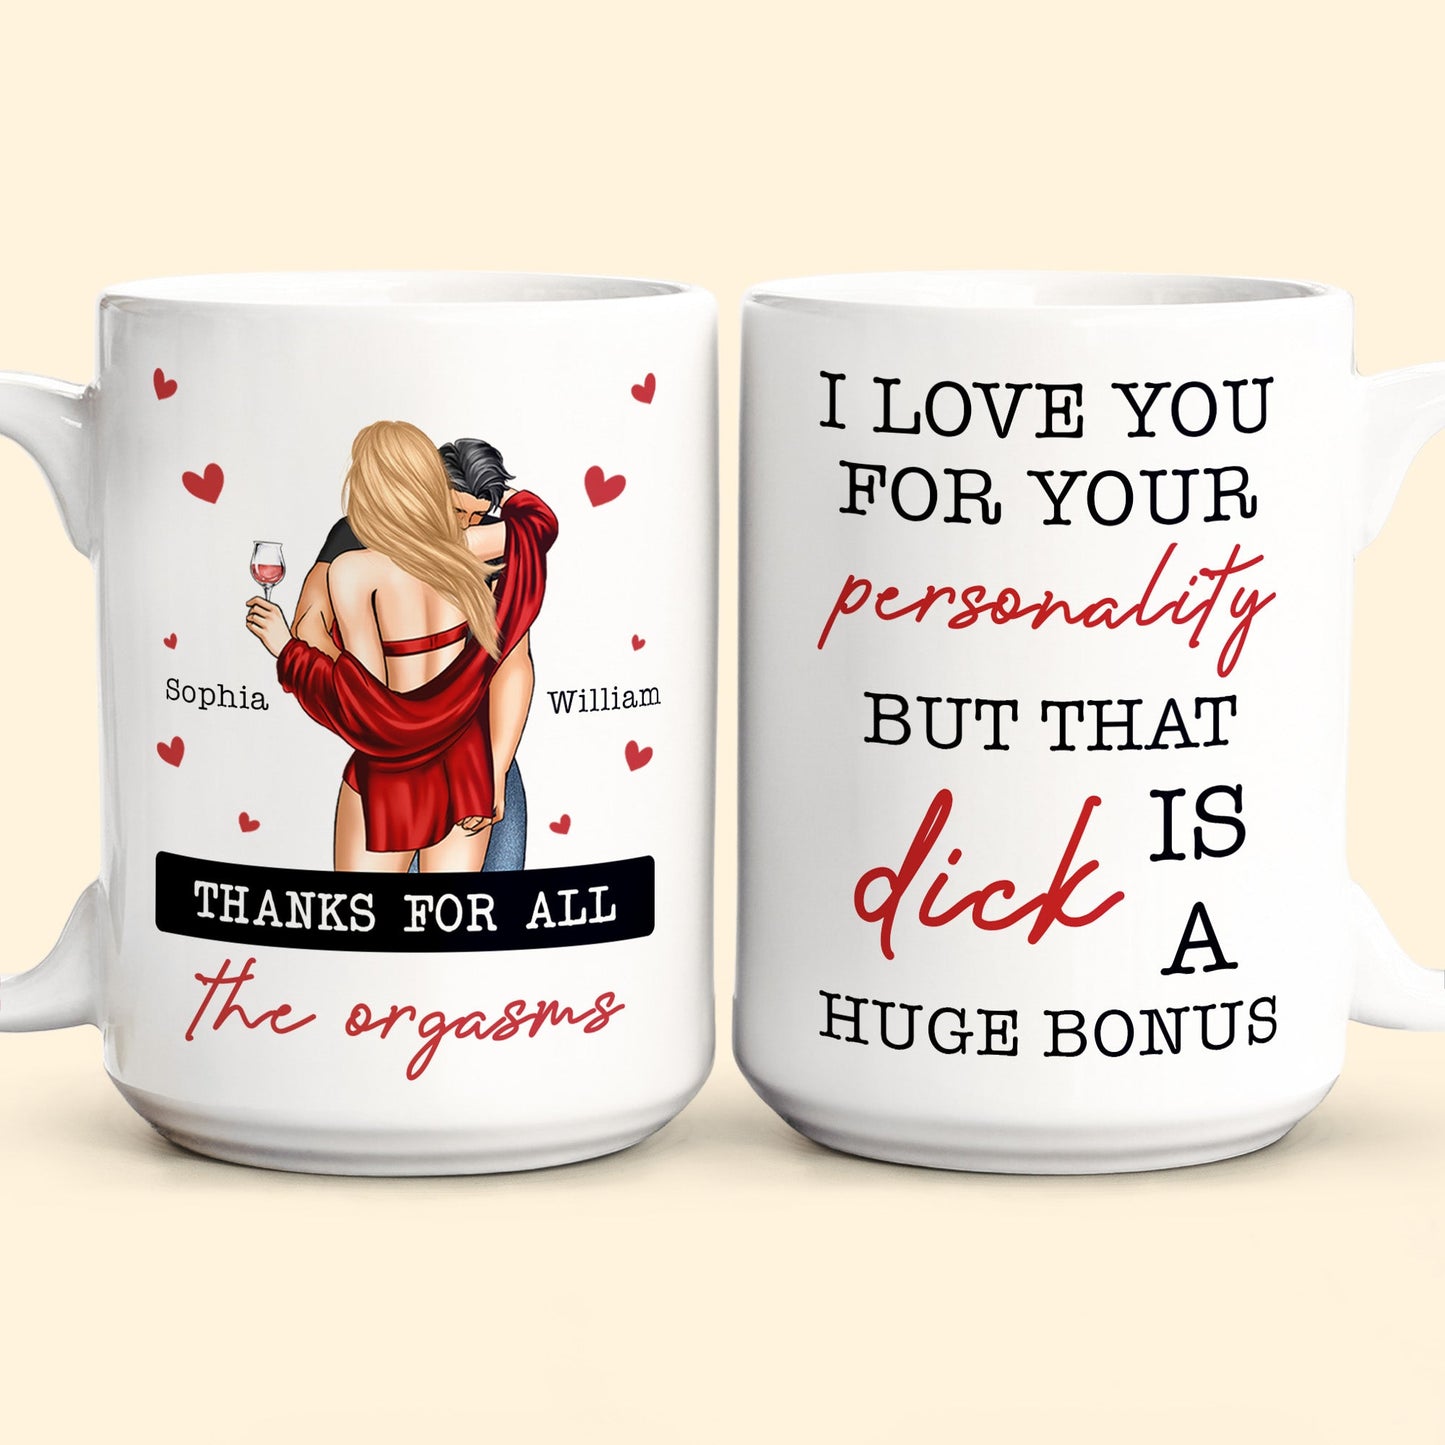 I Love You For Your Personality Anniversary Gift - Personalized Mug